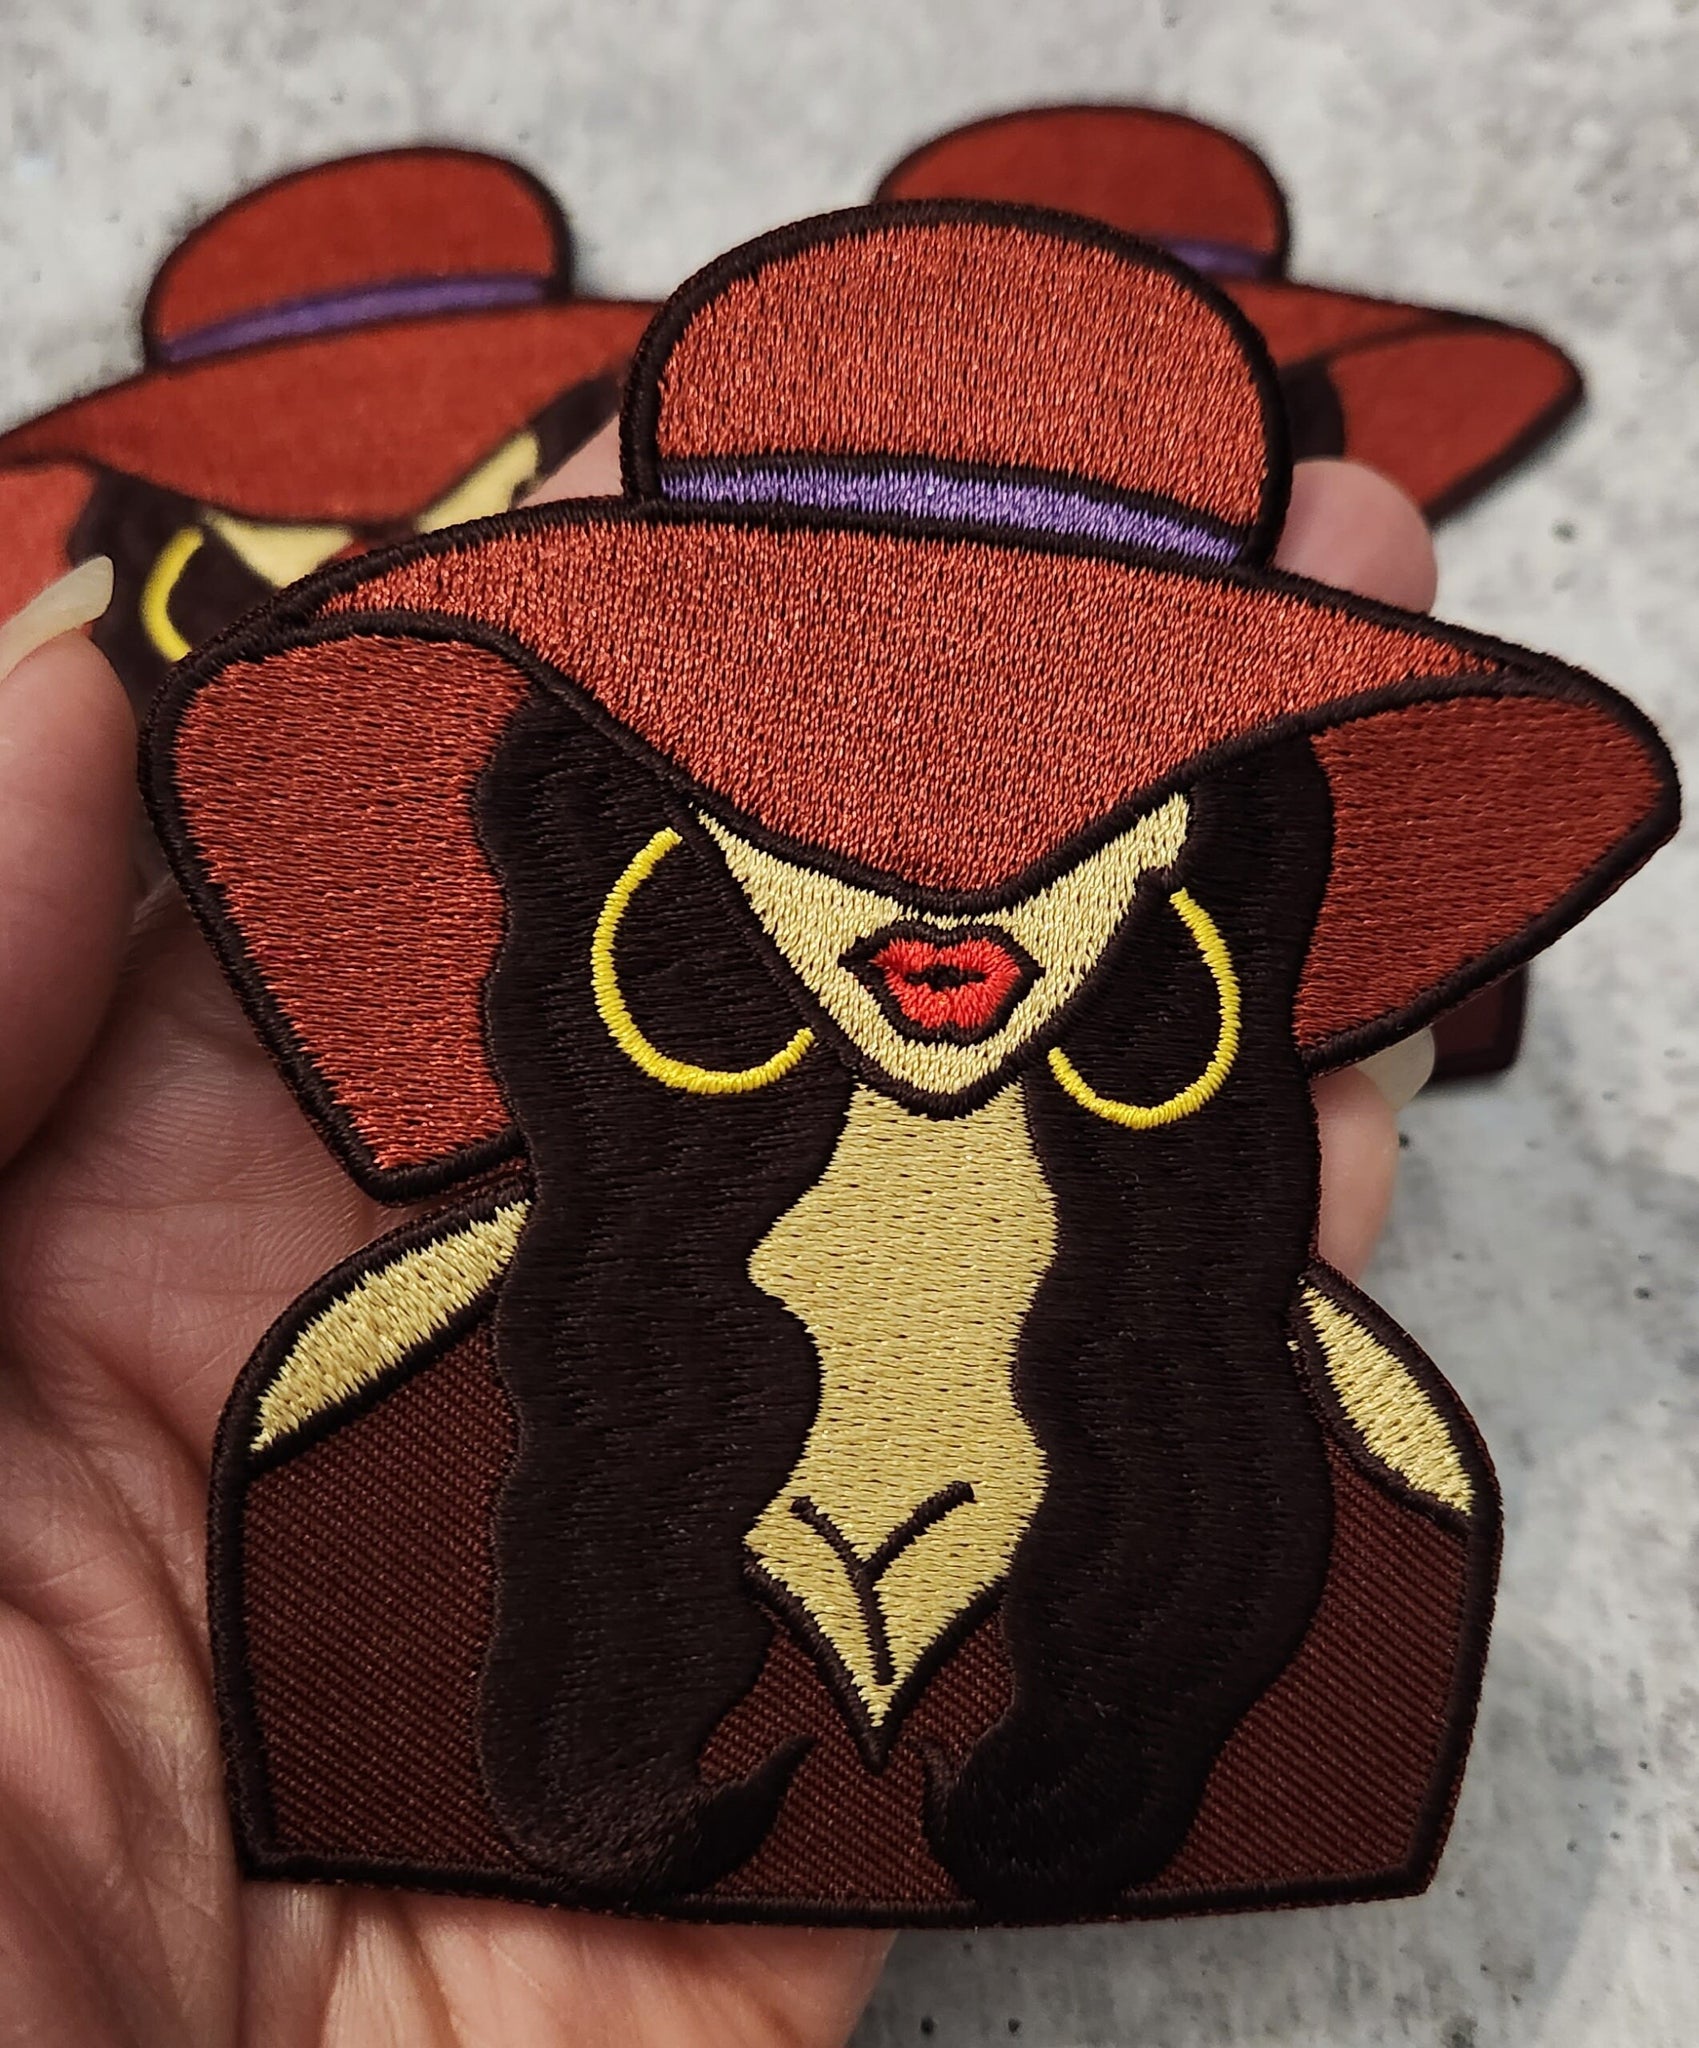 New, 1-pc "Fedora Cutie", Size 4", Iron-on Embroidered Patch for Shoes, Phone Cases, Makeup Bags, Clothing, Hats, Jackets and Accessories